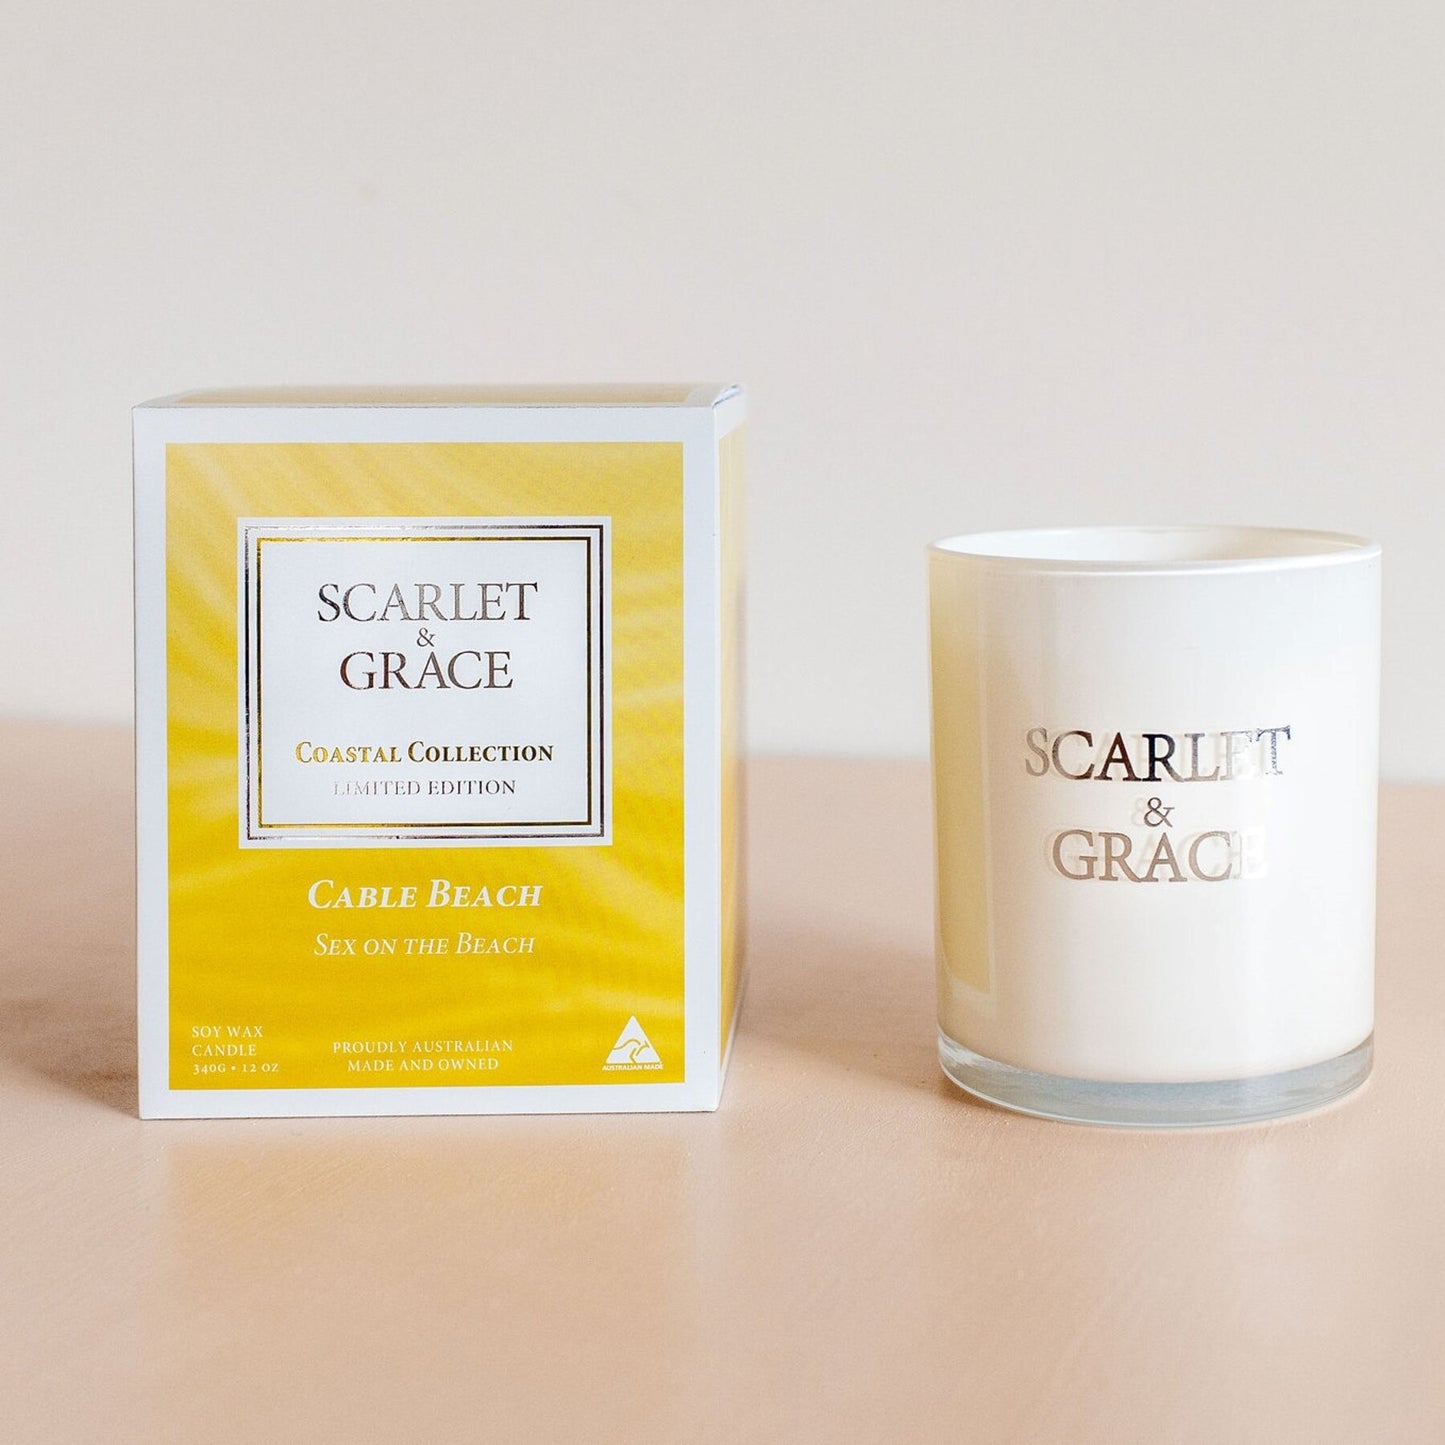 Cable Beach - Sex on the Beach 340gm Soy Wax Candle - Scarlet & Grace